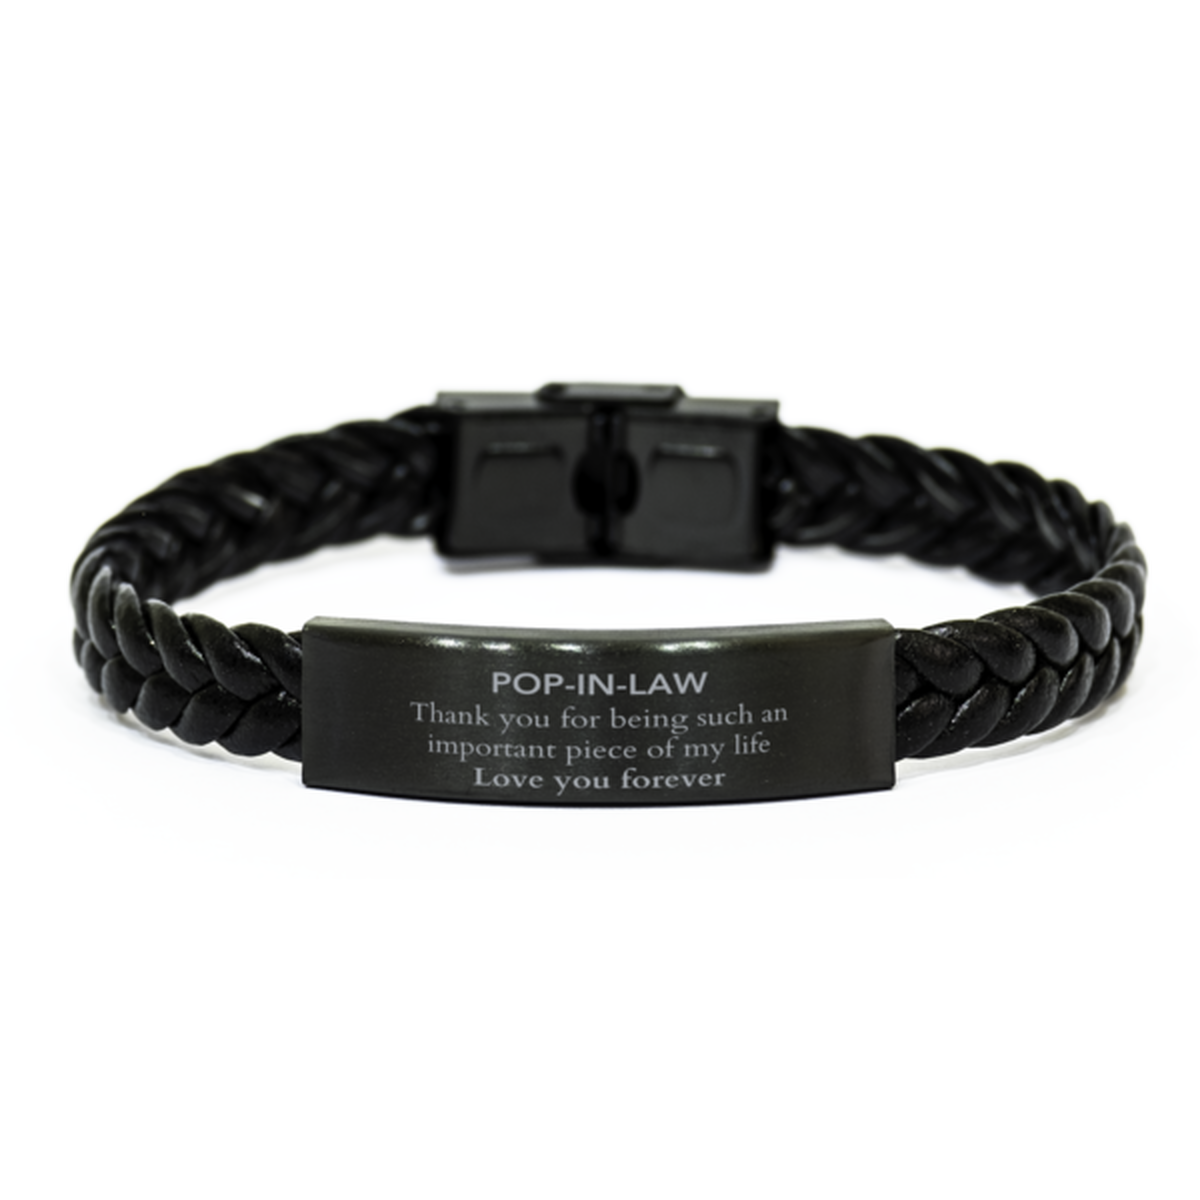 Appropriate Pop-in-law Braided Leather Bracelet Epic Birthday Gifts for Pop-in-law Thank you for being such an important piece of my life Pop-in-law Christmas Mothers Fathers Day